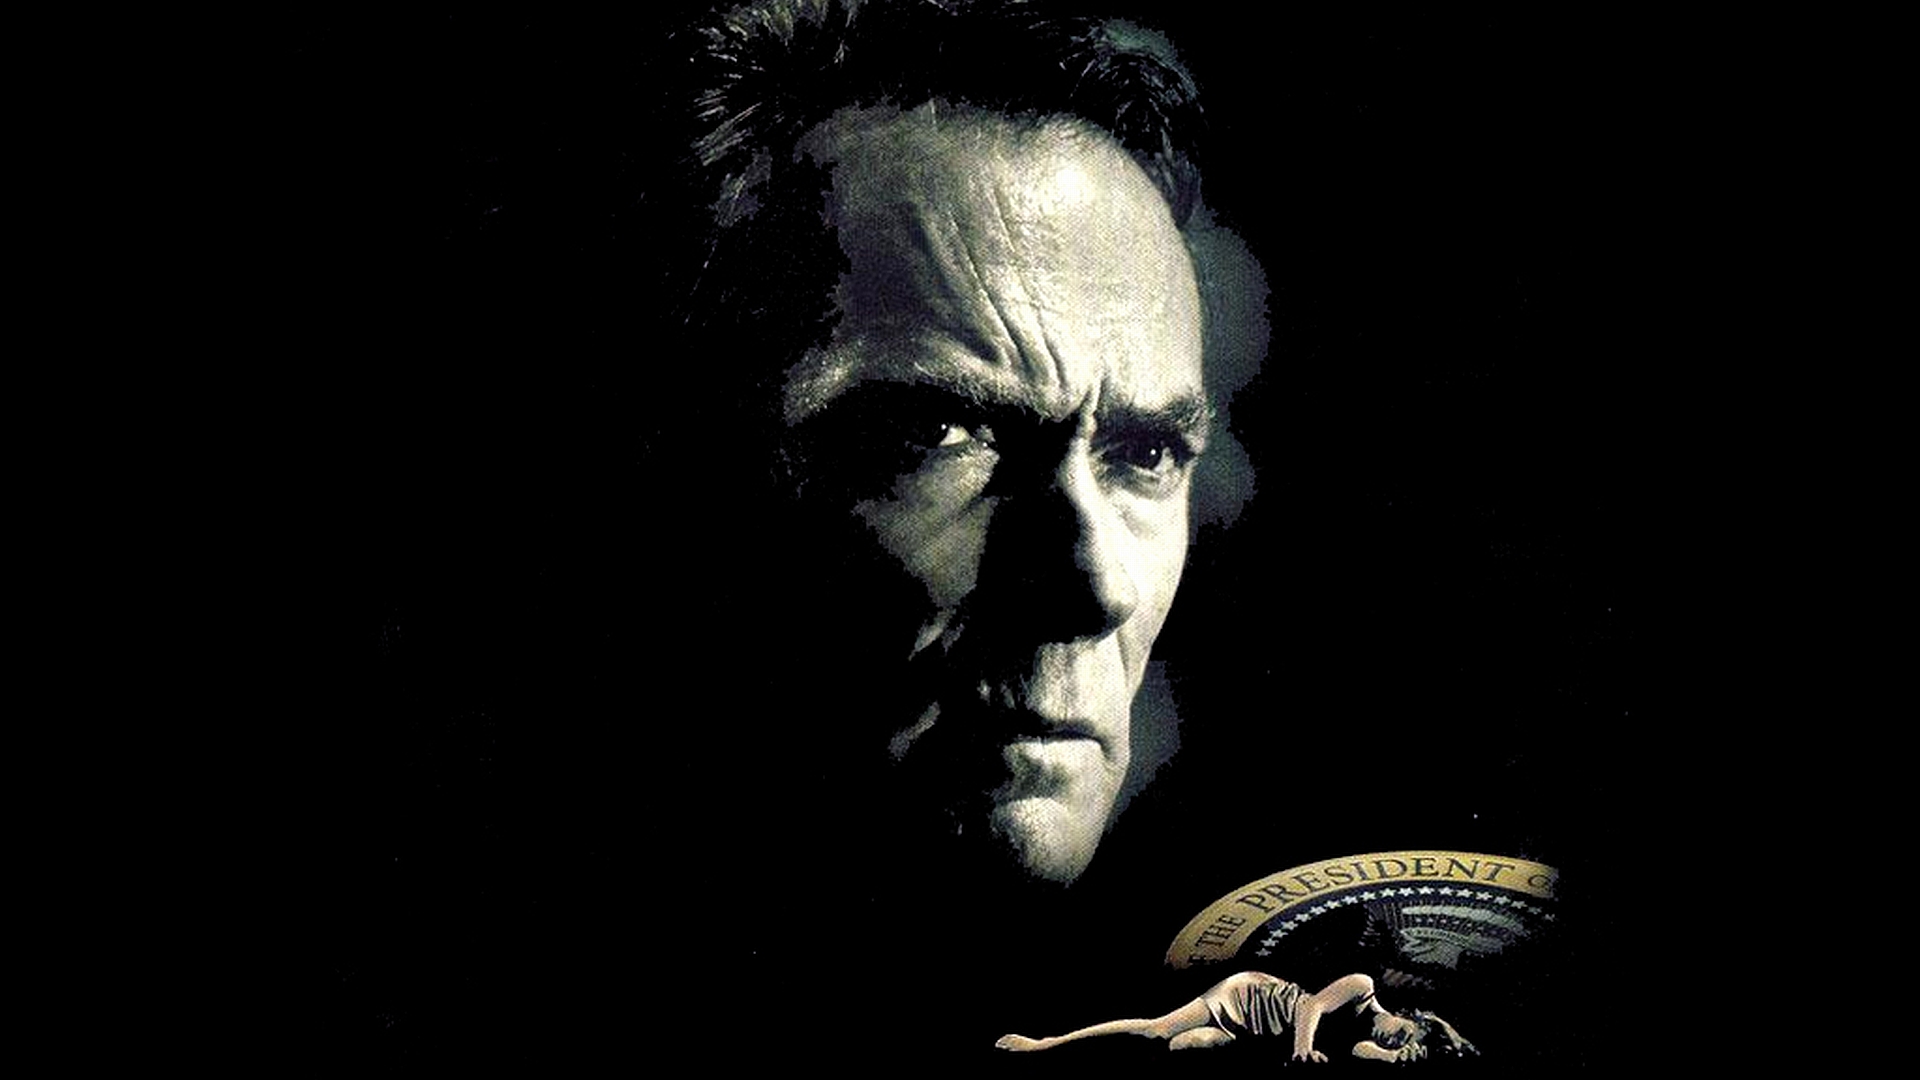 movie, absolute power, clint eastwood